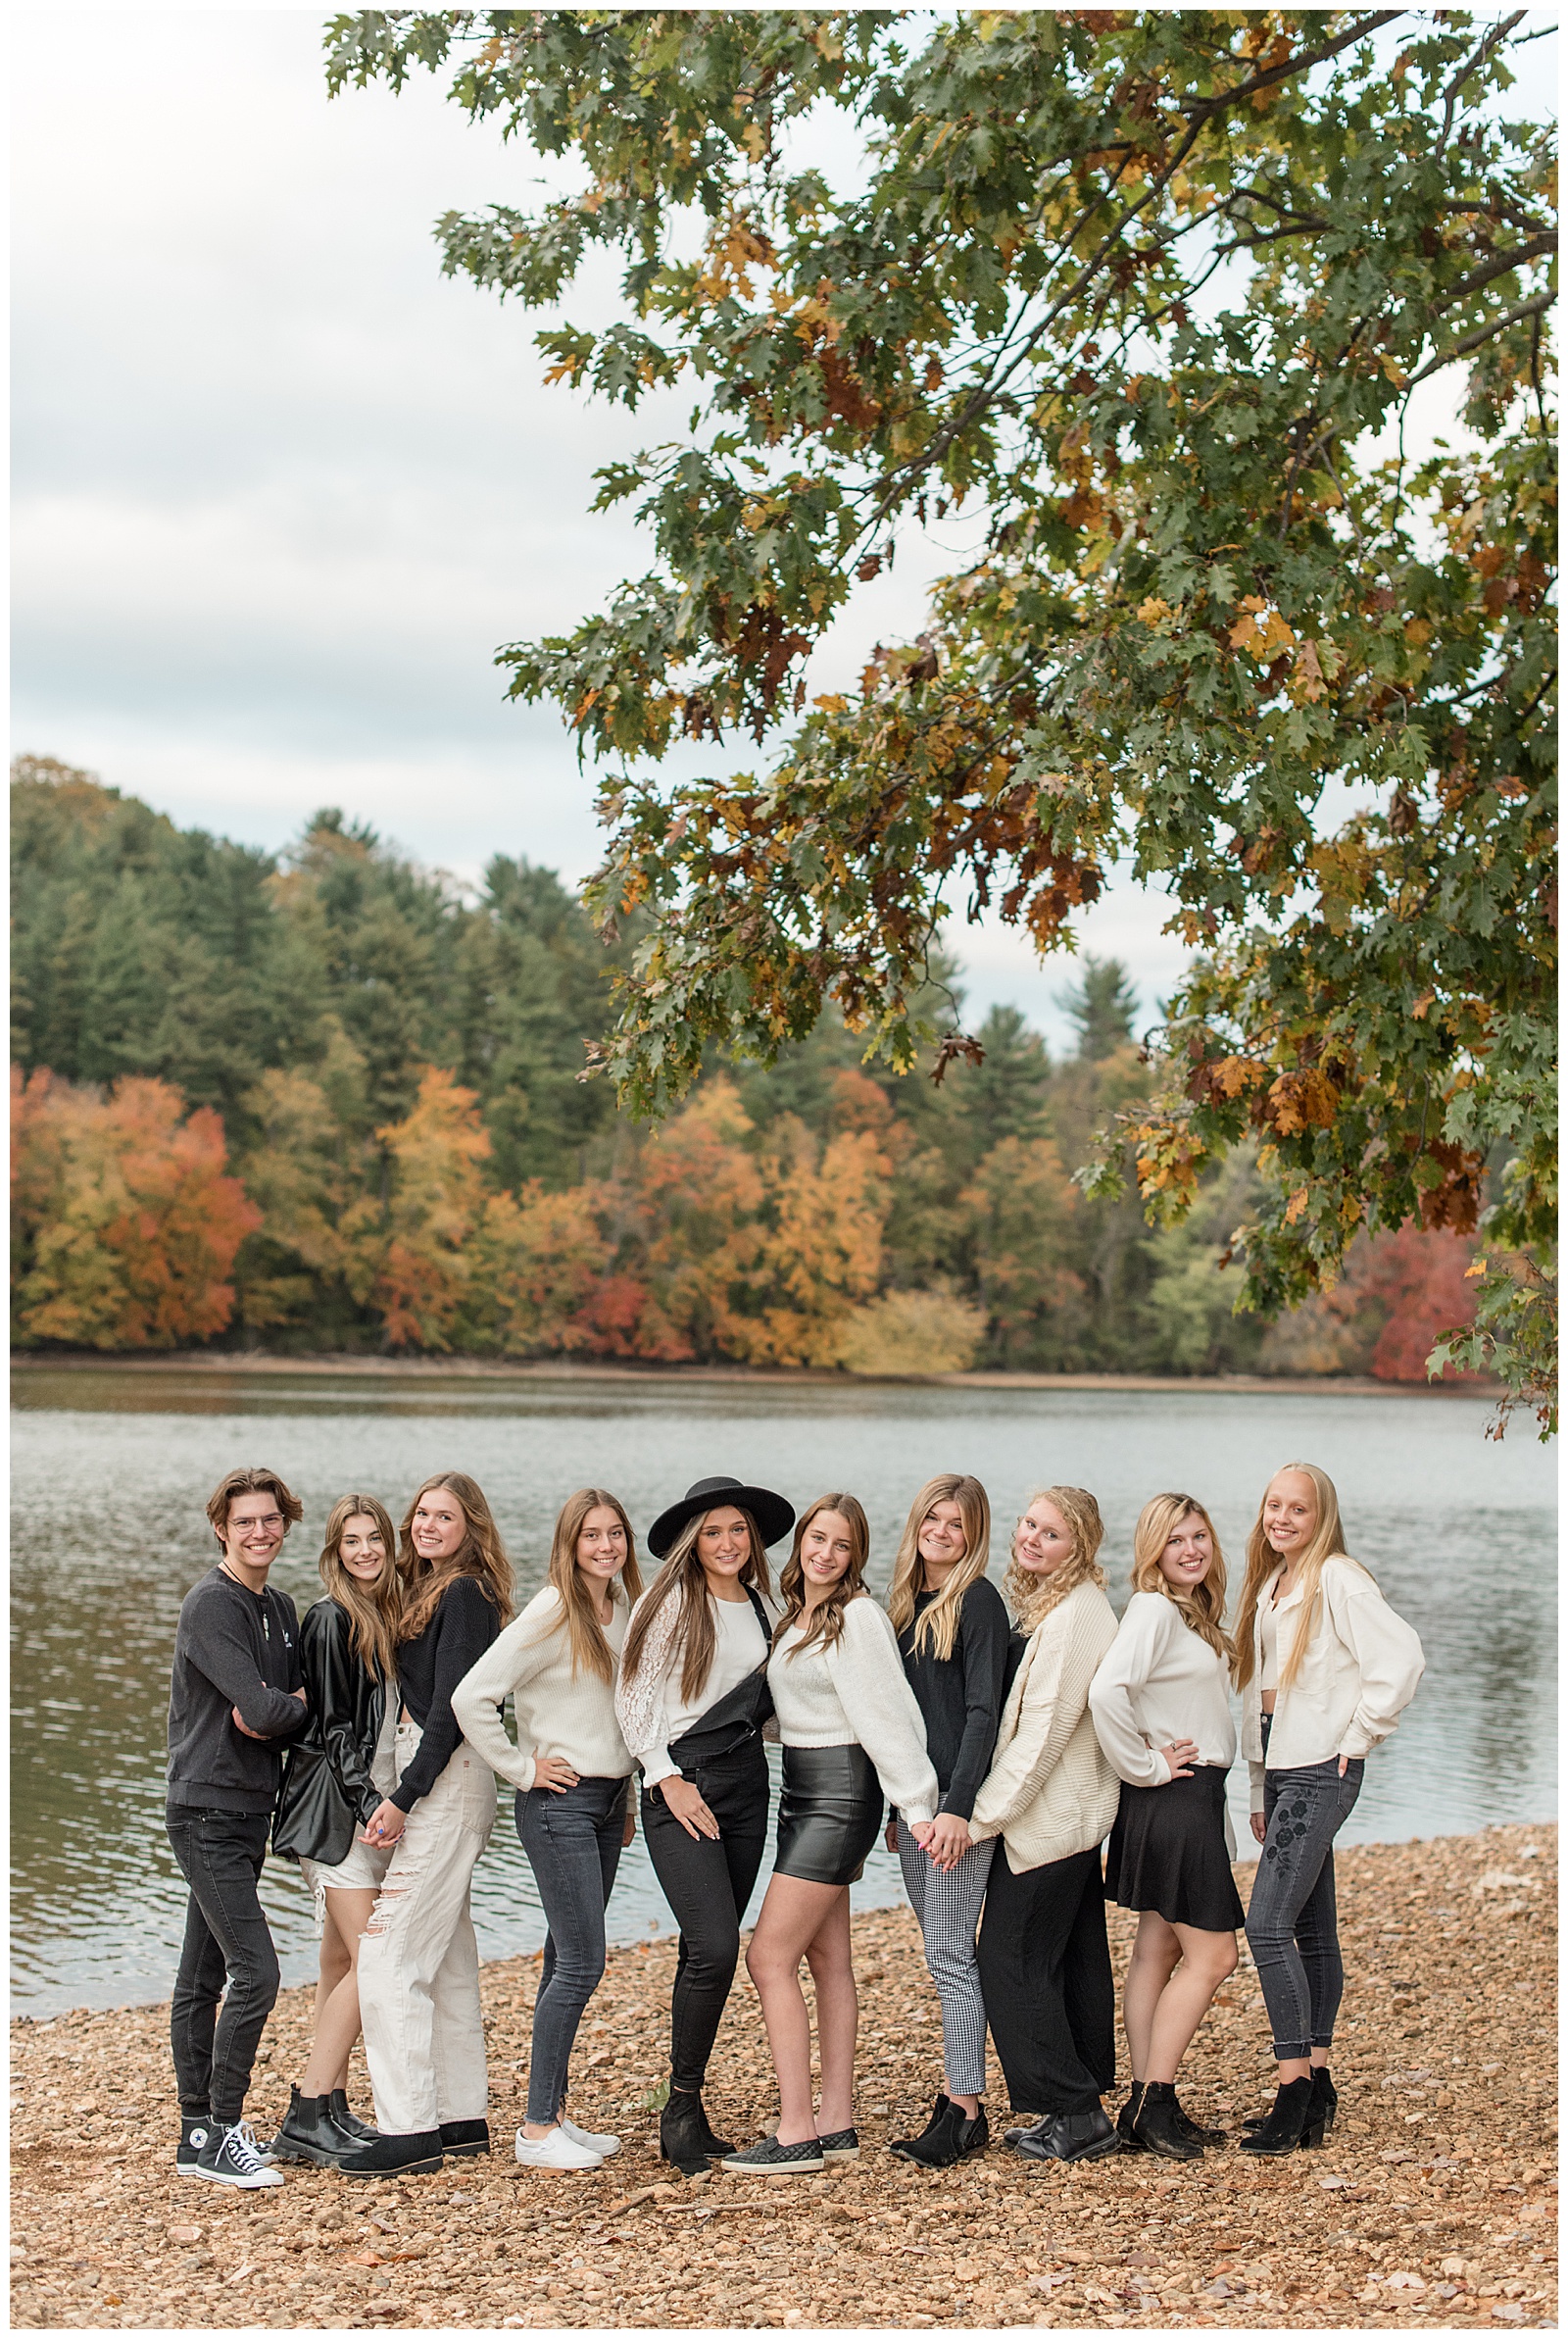 senior spokesmodel group all standing close with some facing right and others facing left by lake with colorful trees in york pennsylvania